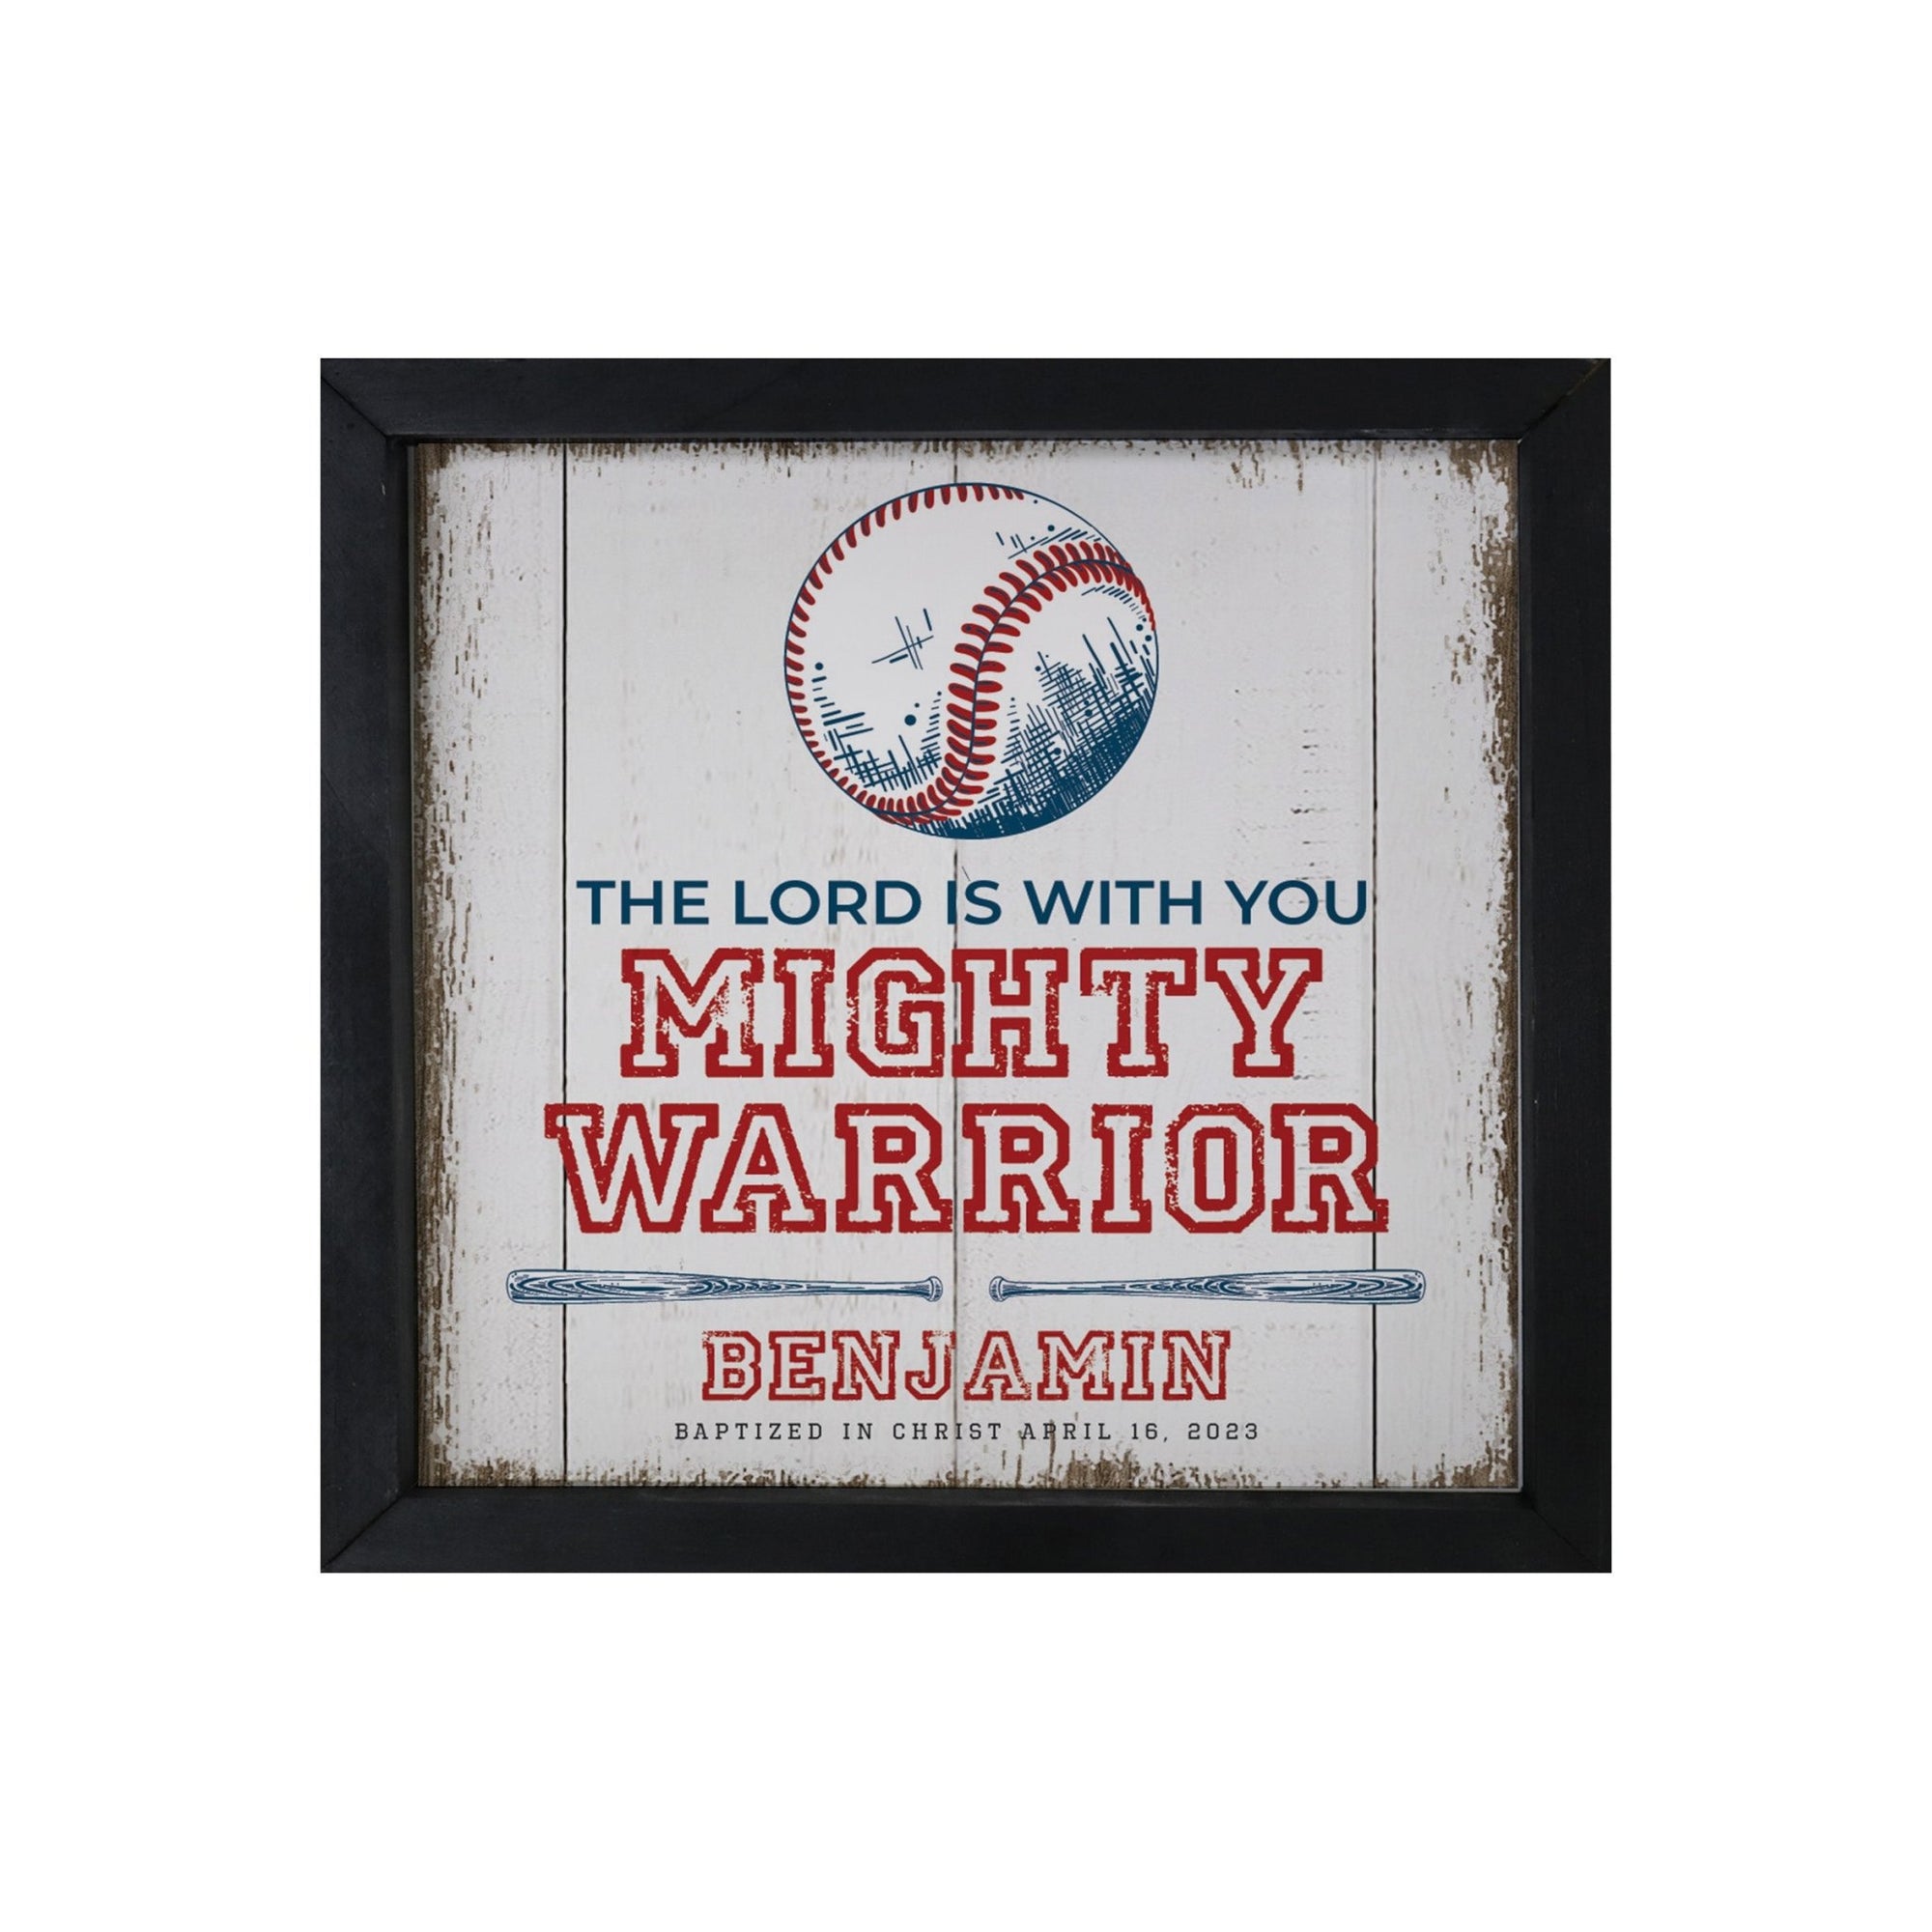 Personalized Elegant Baseball Framed Shadow Box Shelf Décor With Inspiring Bible Verses - Mighty Warrior - LifeSong Milestones